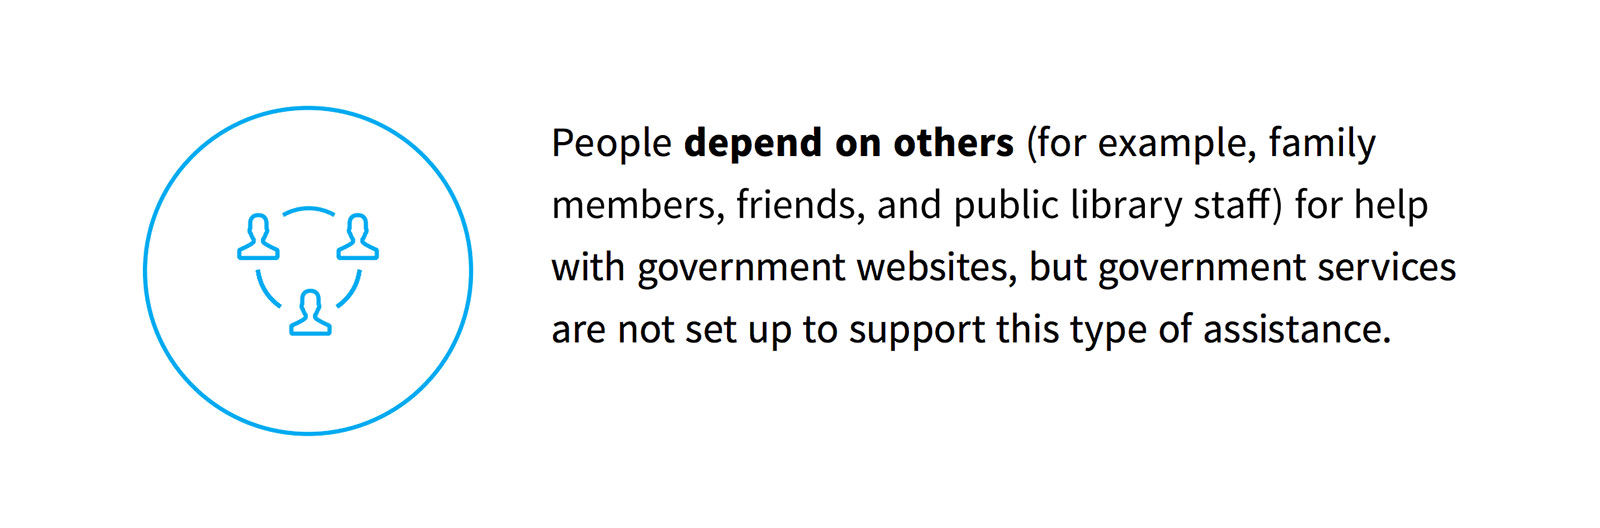 People depend on others (for example, family members, friends, and public library staff) for help with government websites, but government services are not set up to support this type of assistance.